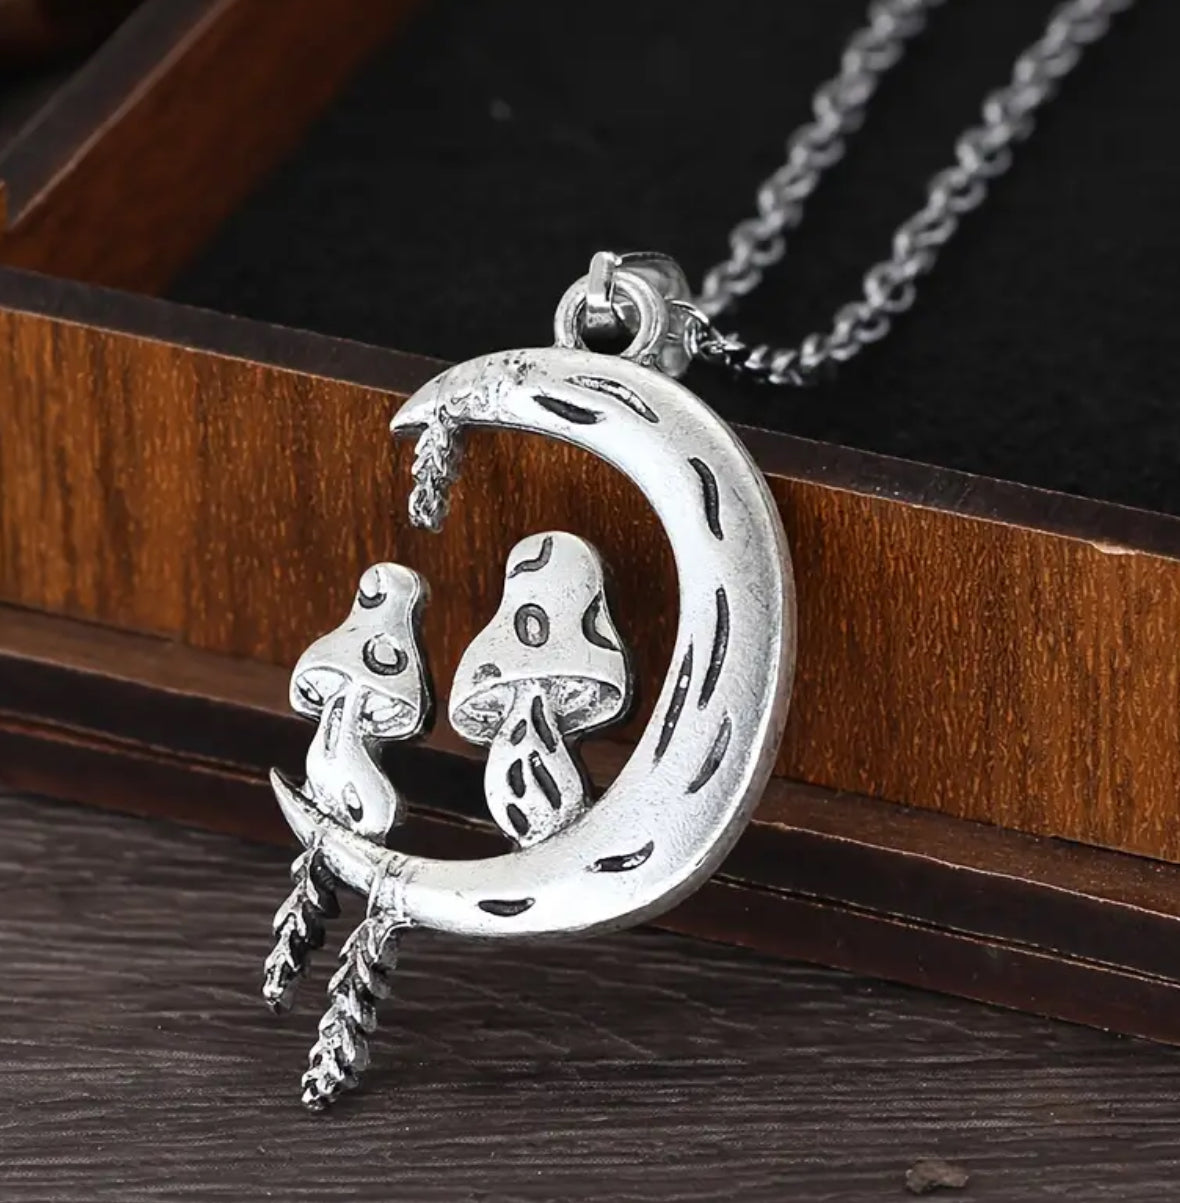 Witchy Mushroom Pendant Necklaces